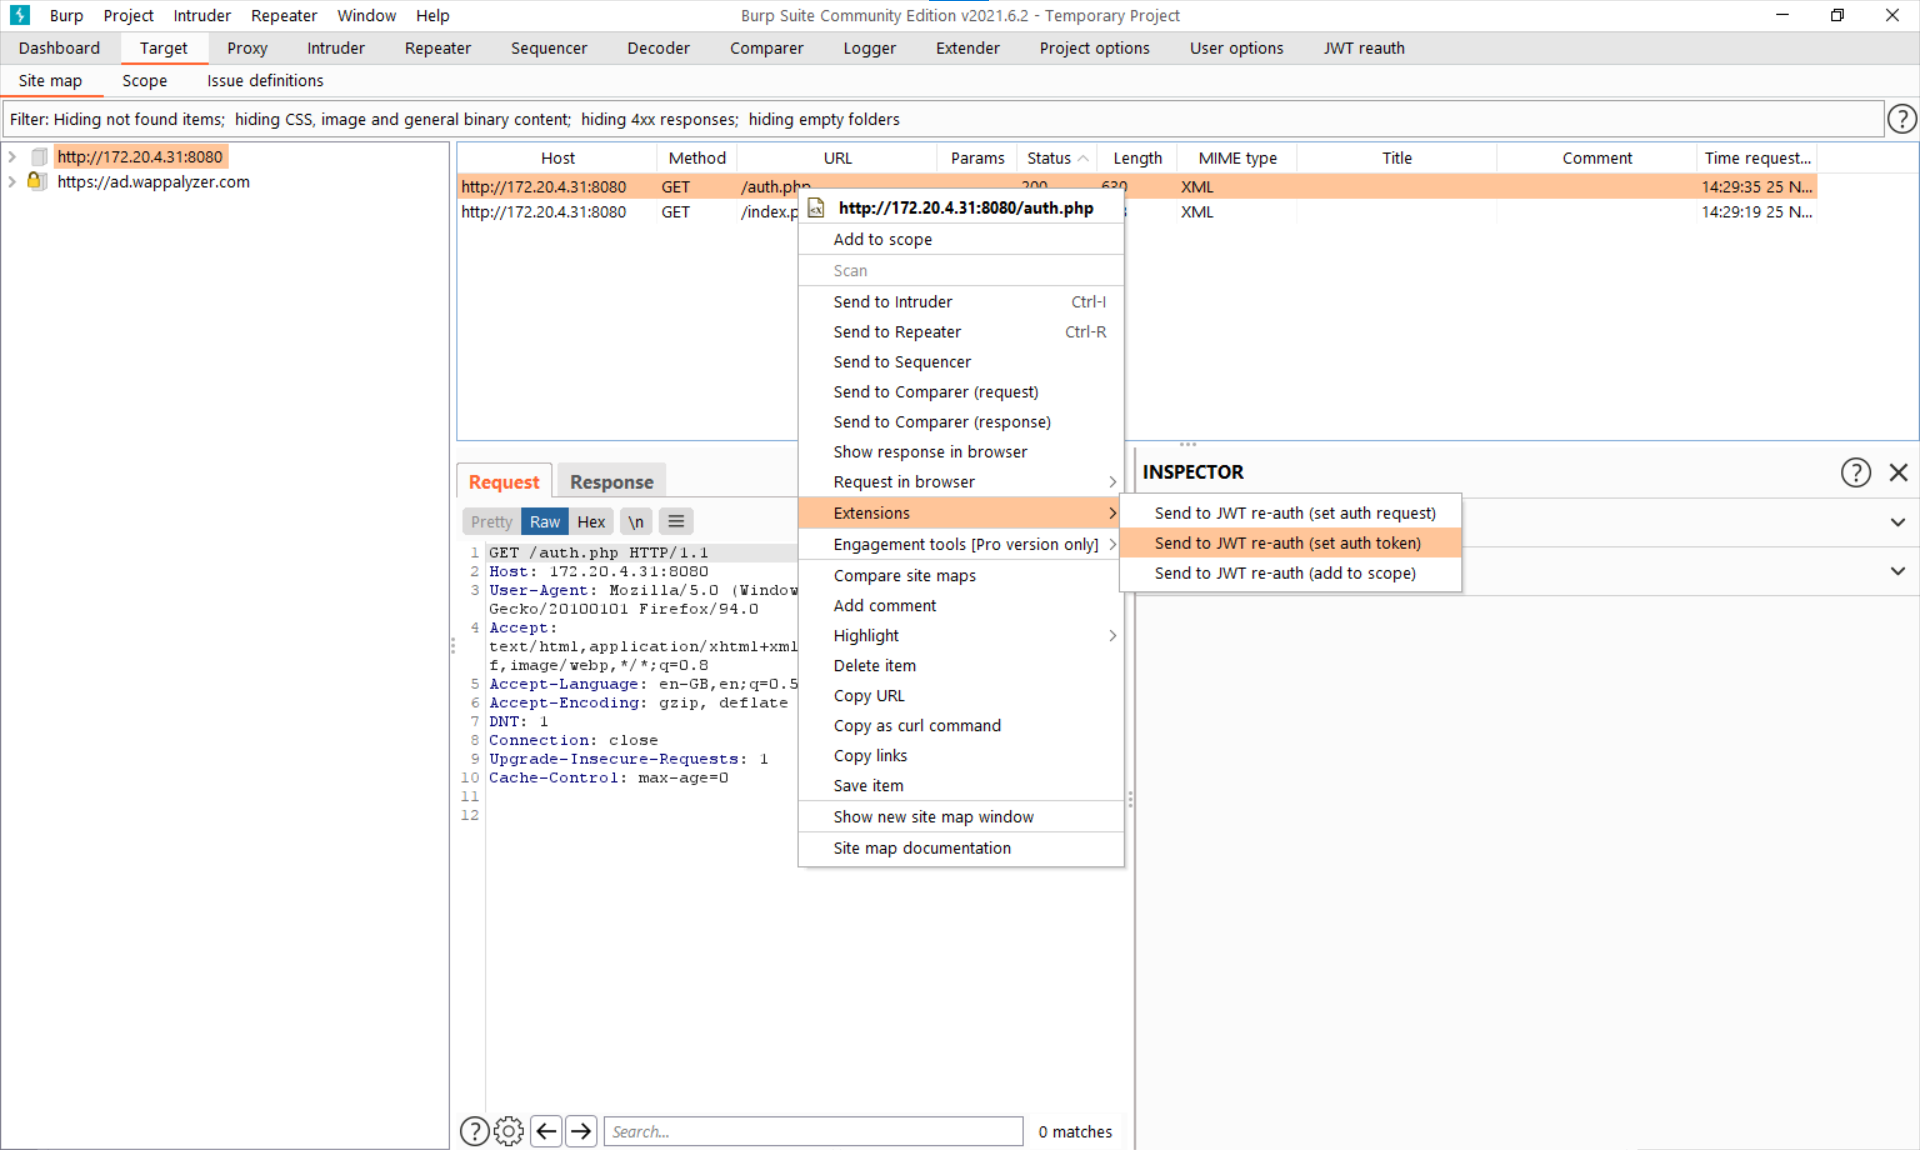 Screenshot showing a drop-down context menu inside of burpsuite, with the text "Send to JWT re-auth (set auth token)"